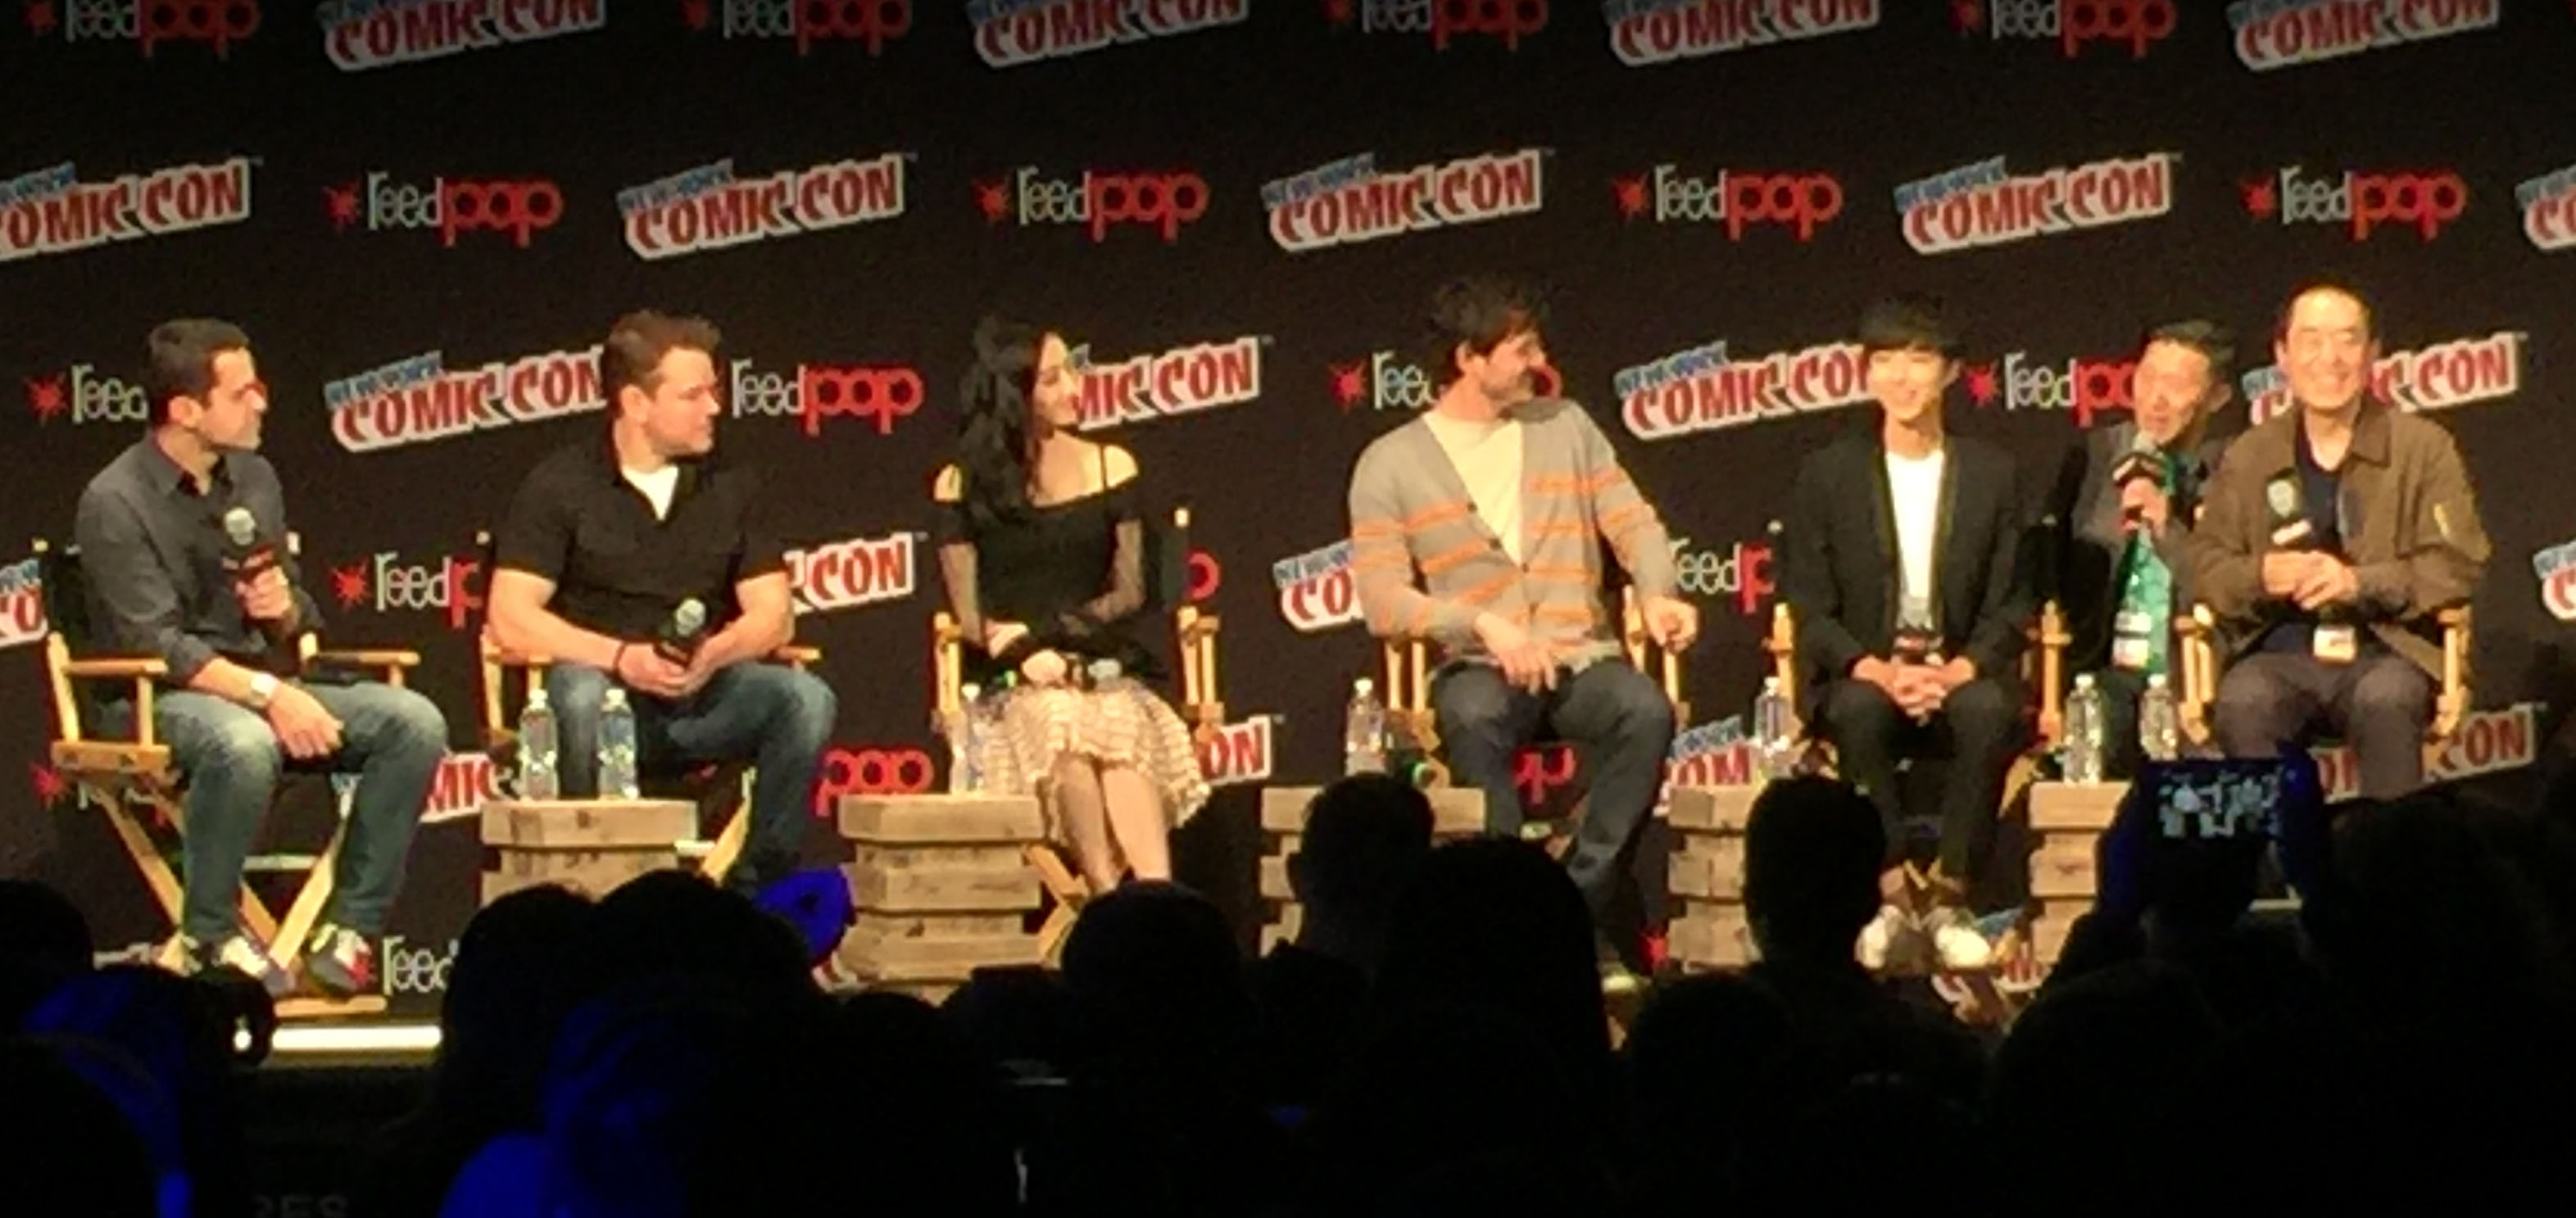 The panel for 'the great wall' at nycc